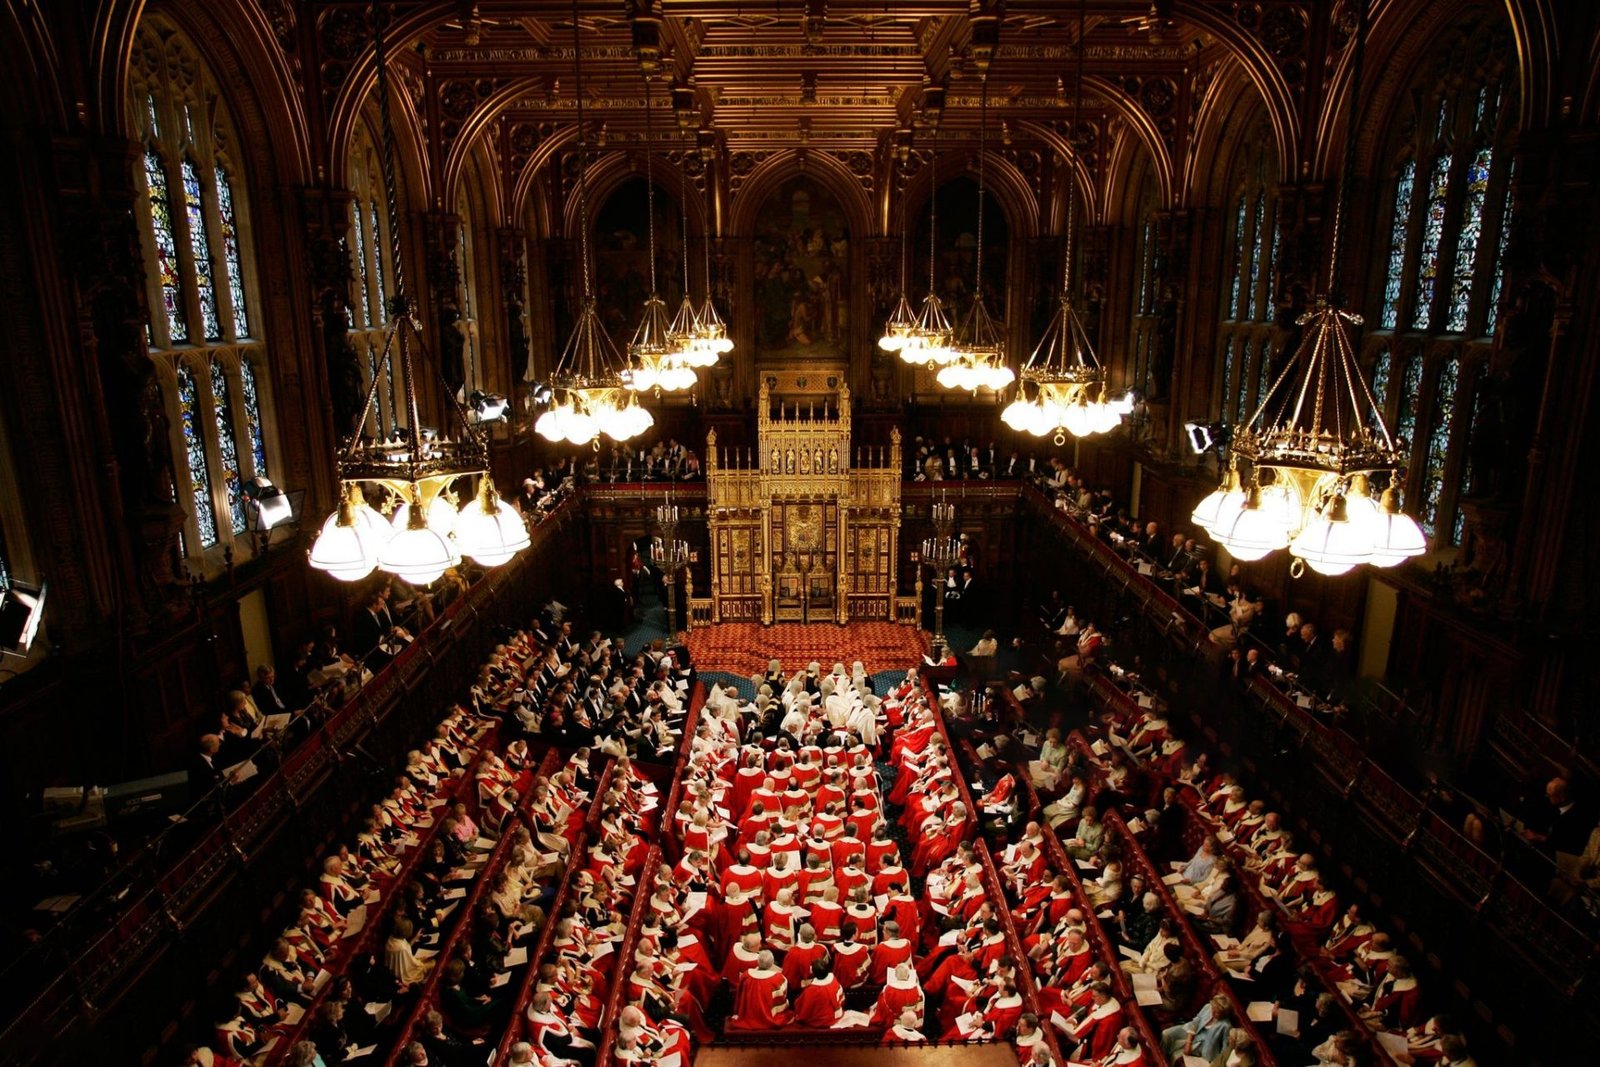 house of lords presentation